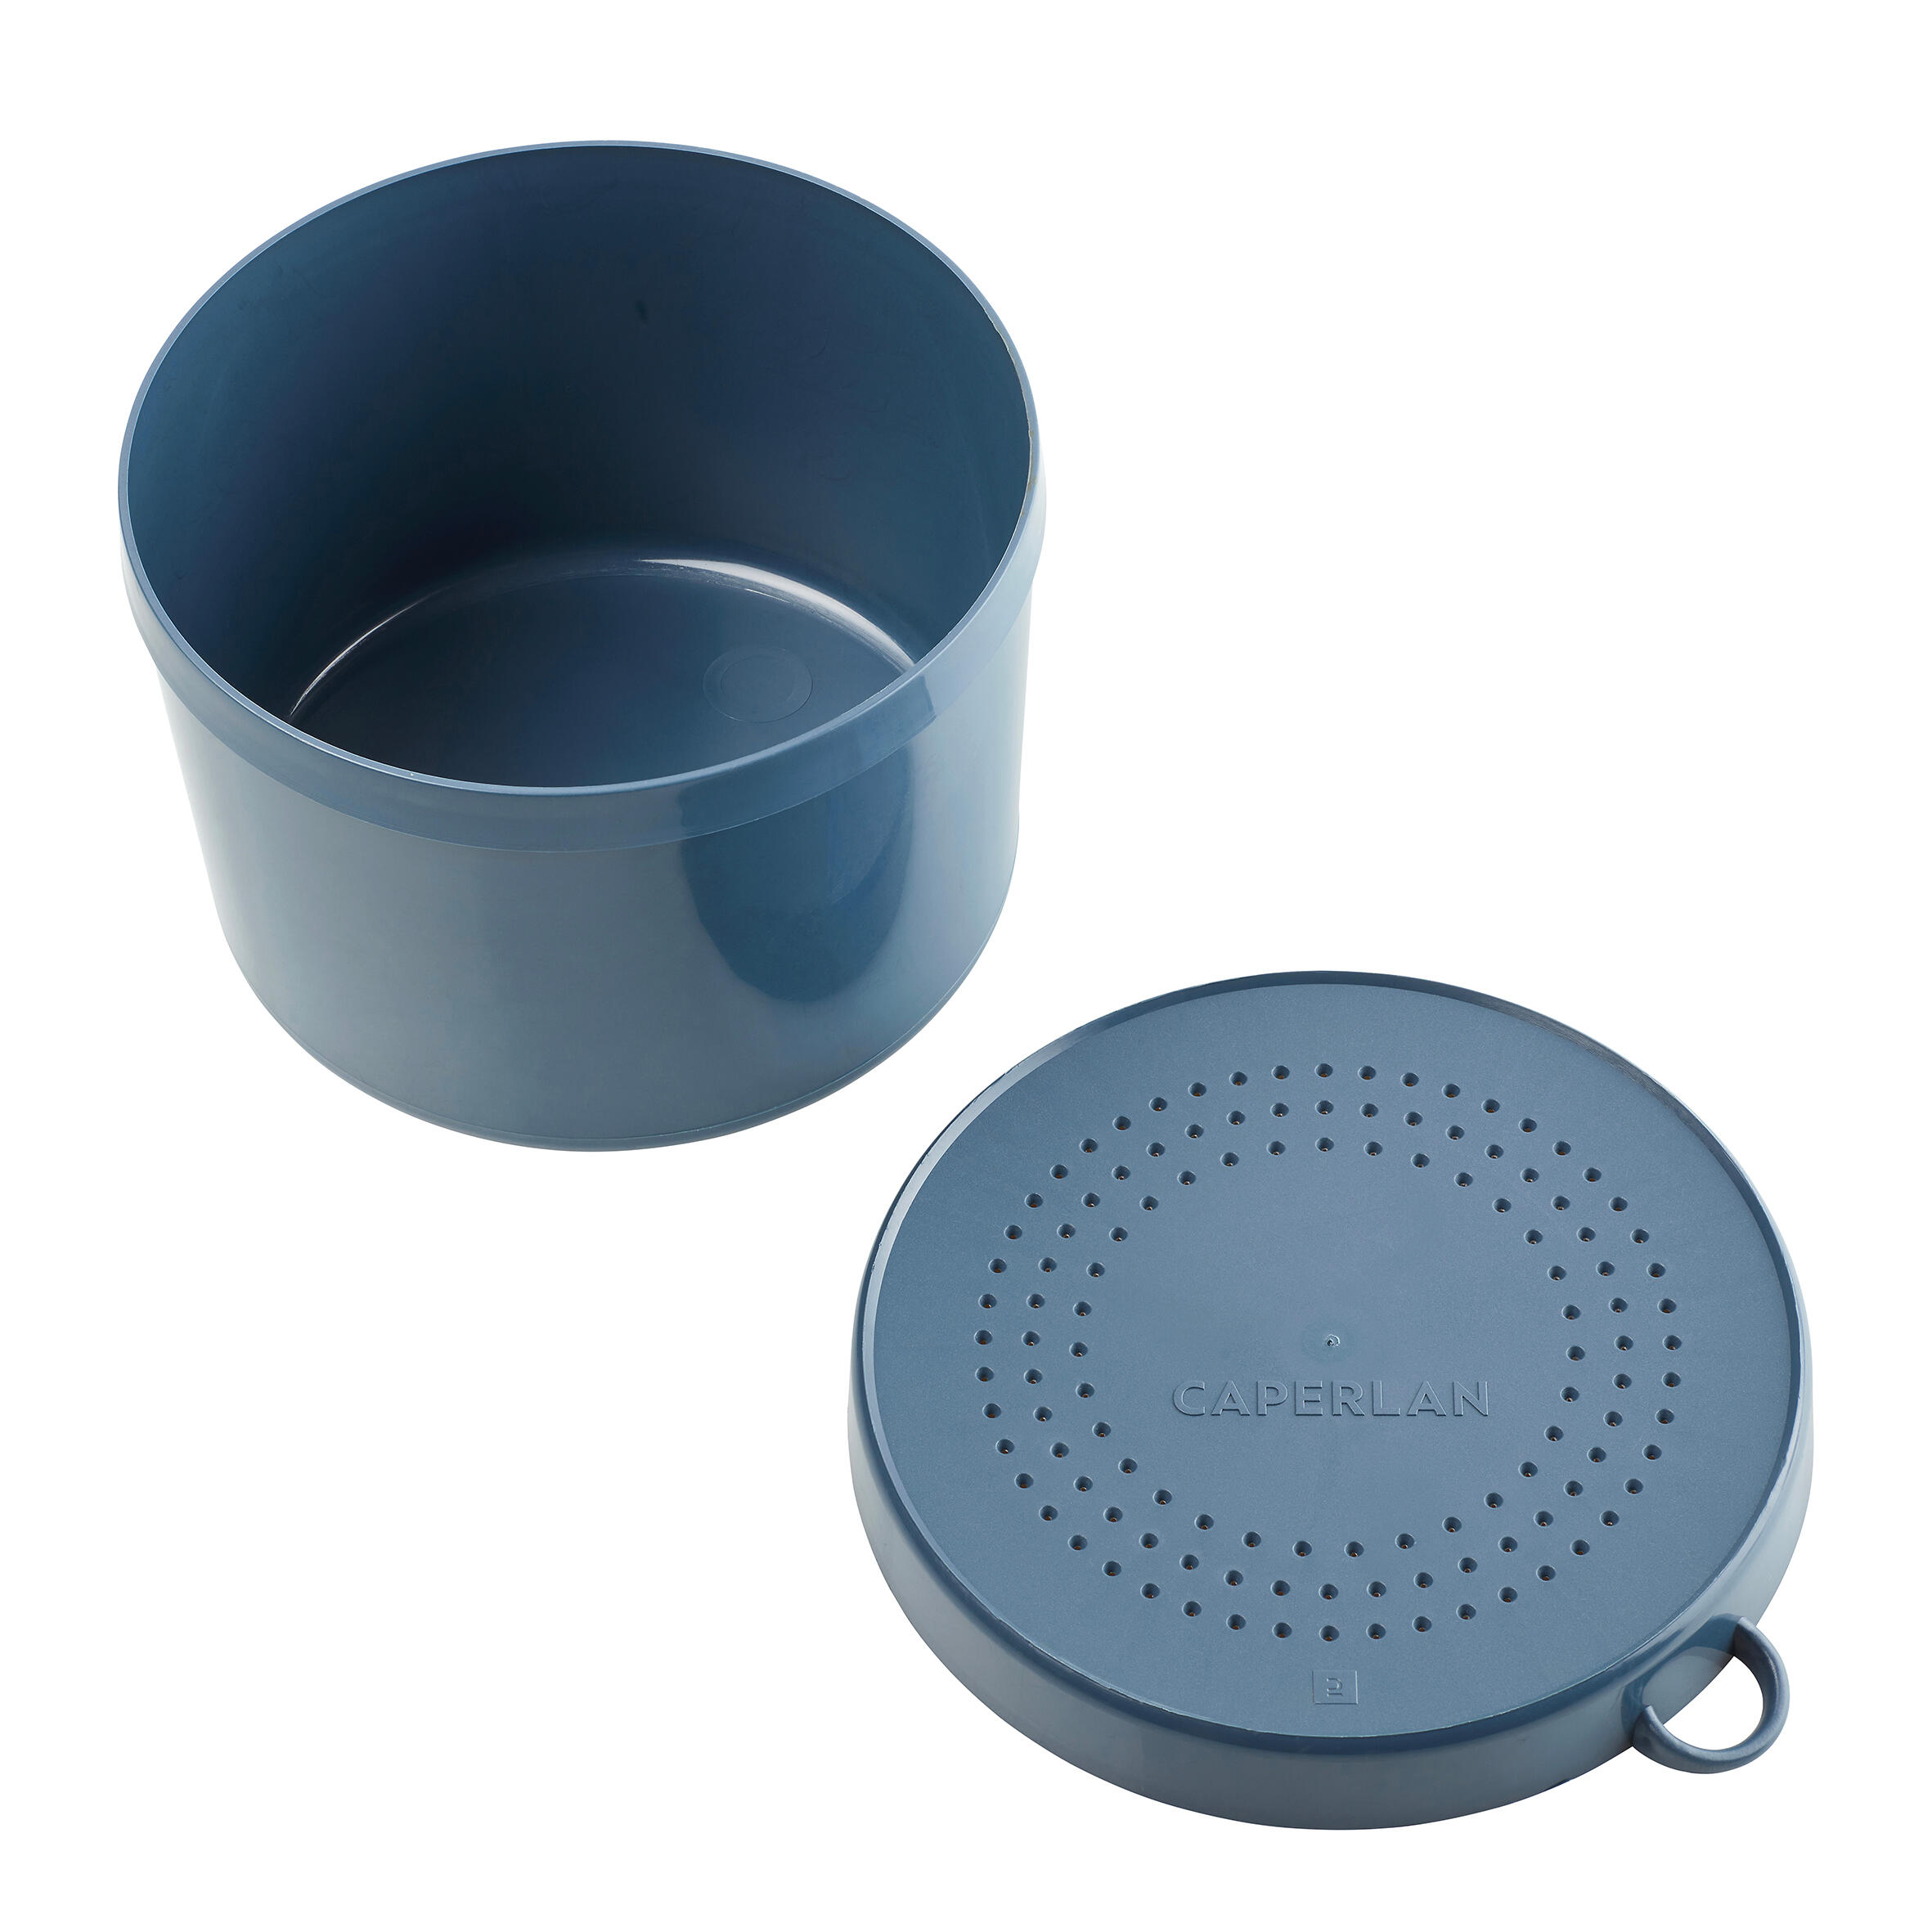 ROUND BAIT BOX 130MM DIAMETER WITH A LID WITH HOLES LVB 1L 2/4